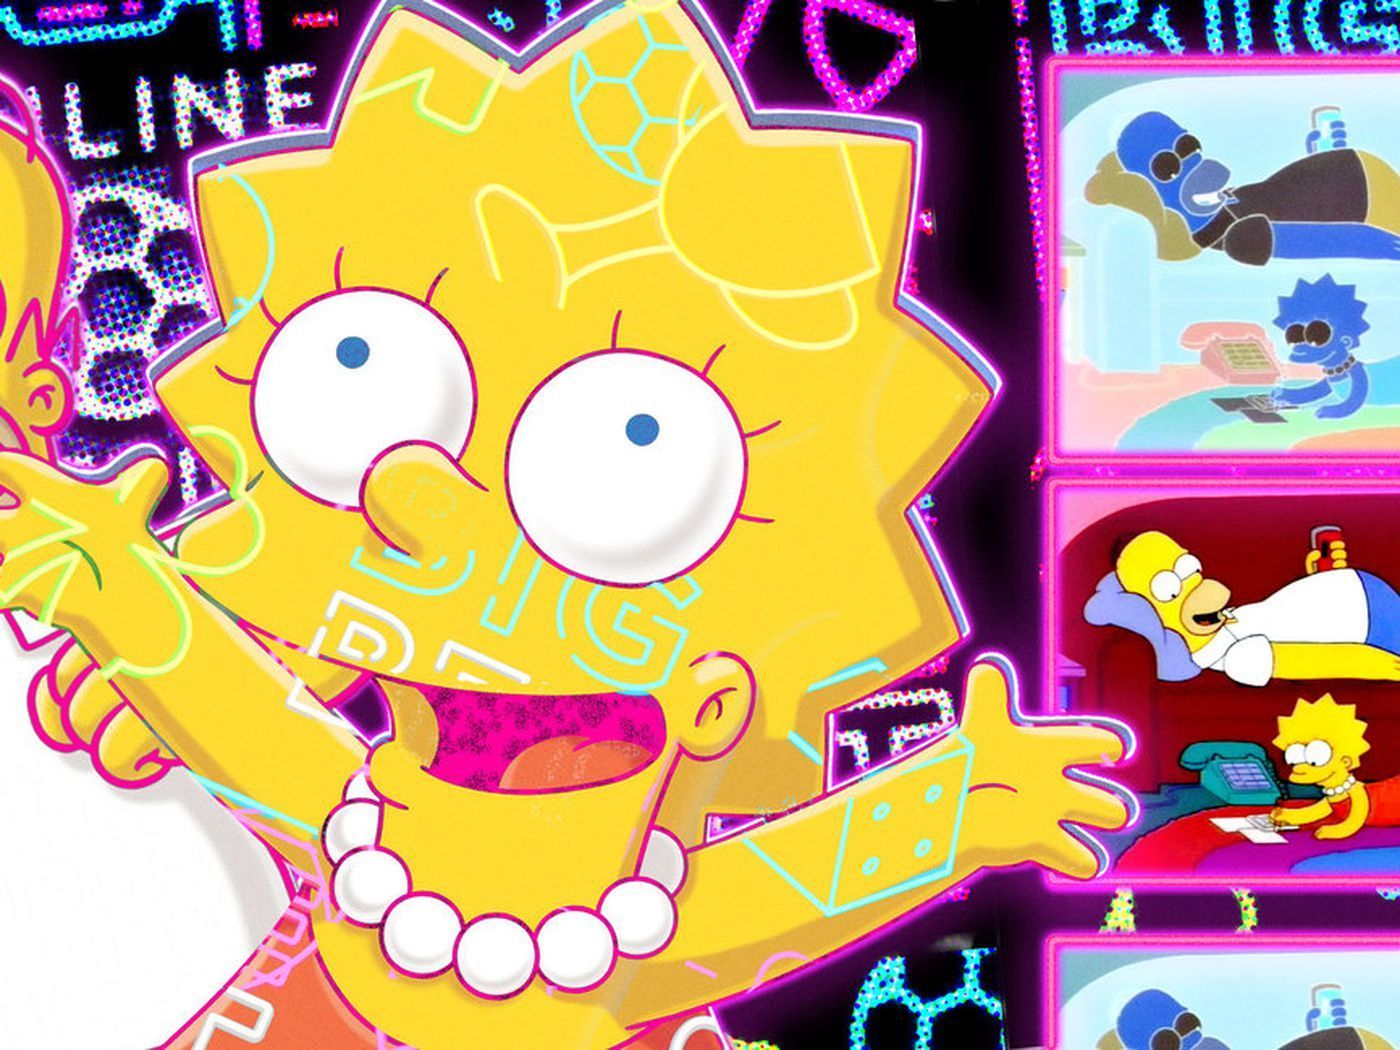 The simpsons are shown in a slot machine - Homer Simpson, Lisa Simpson